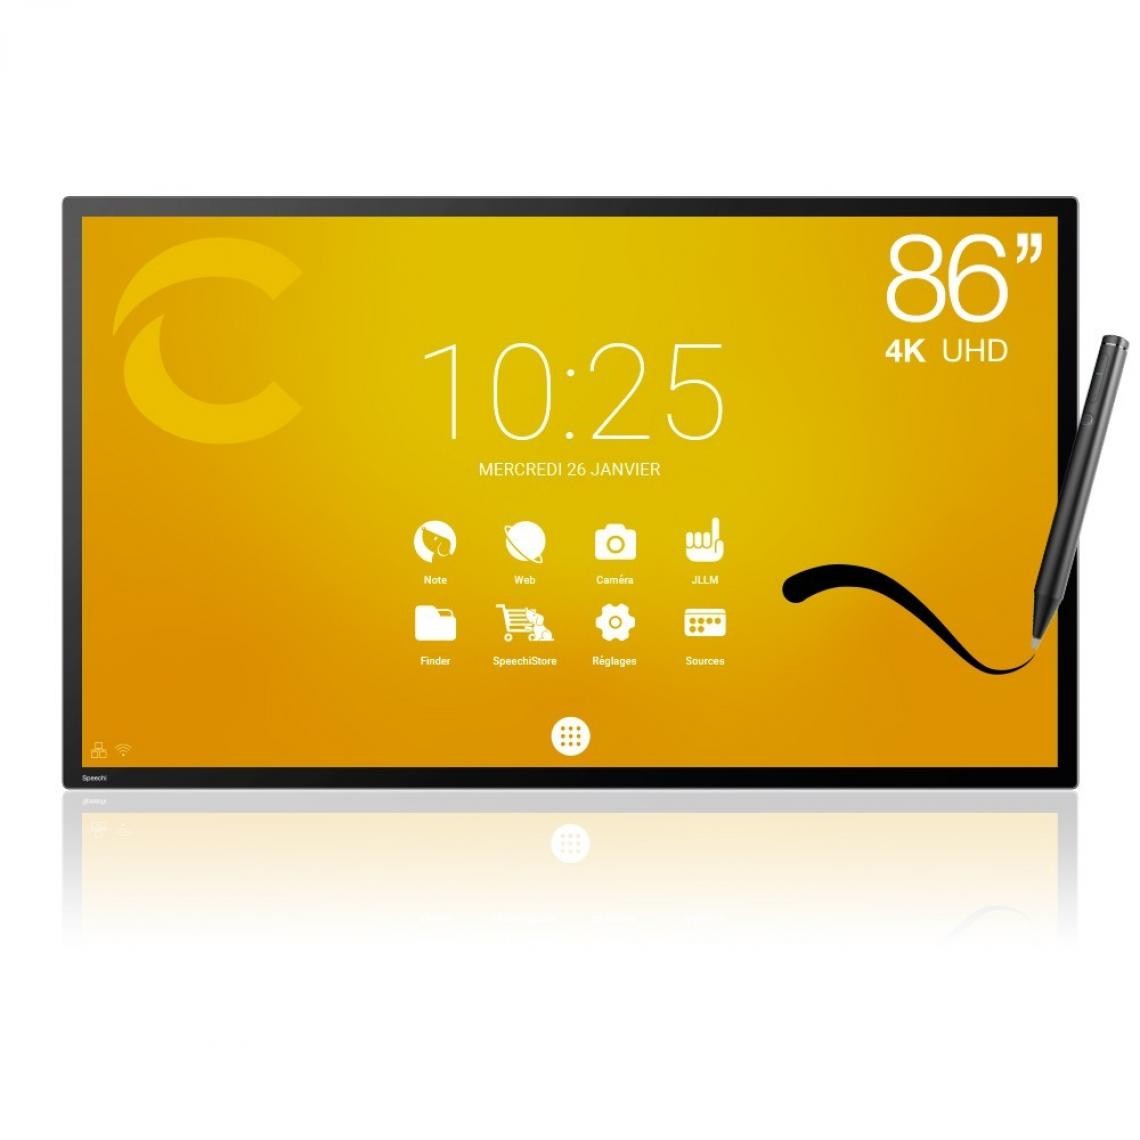 Speechi - Ecran interactif tactile capacitif Android SpeechiTouch UHD - 86’’ - Tablette Android